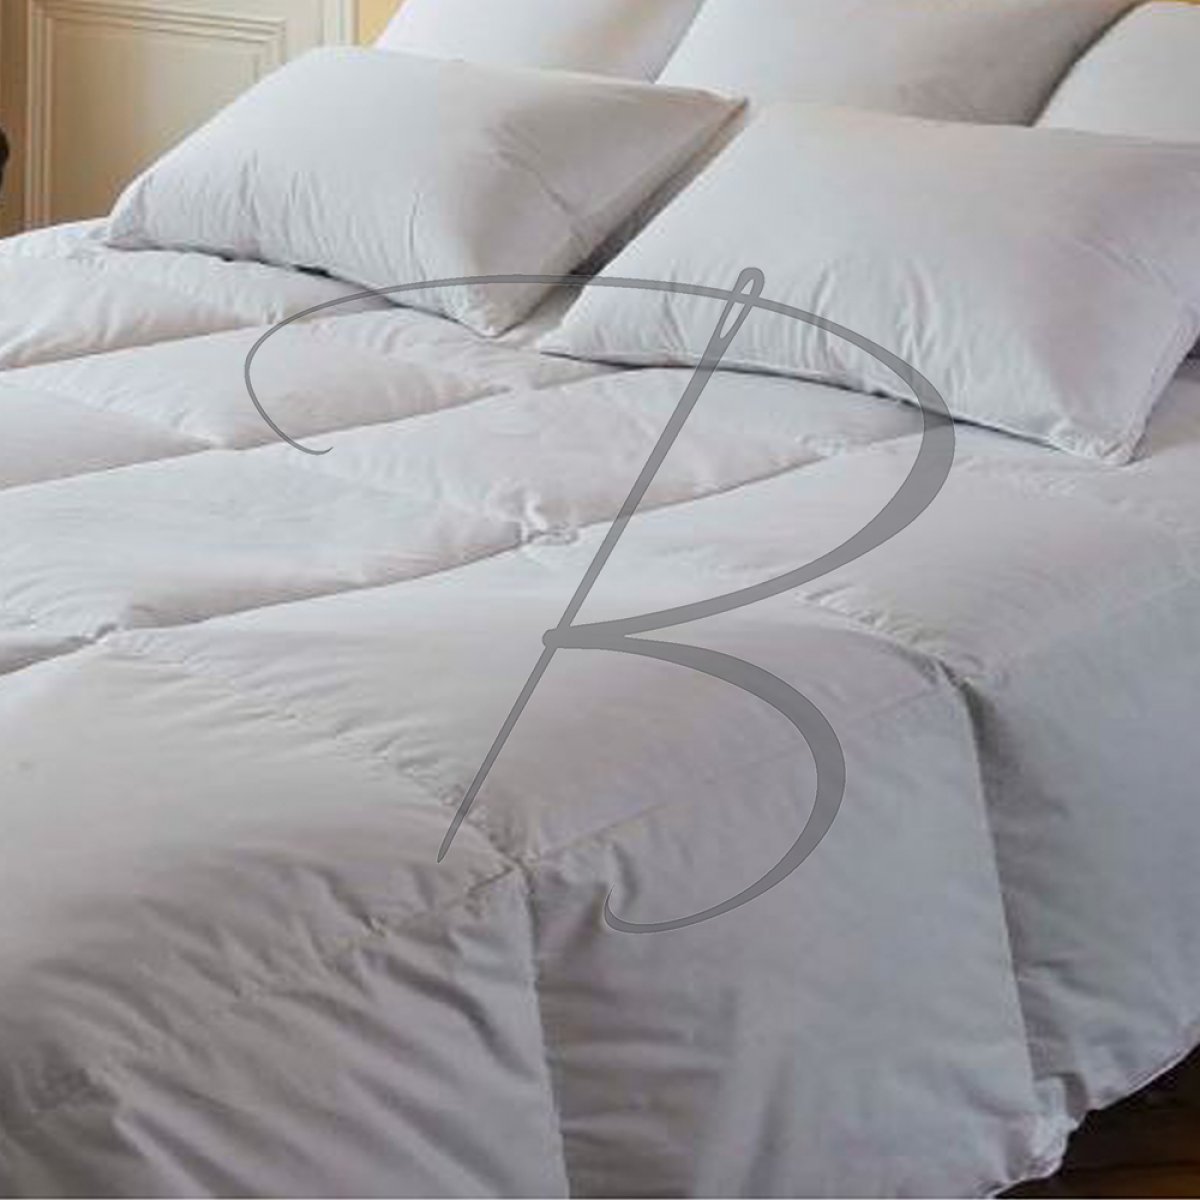 Synthetic comforter EVEREST - 400g/m² - 260 x 240